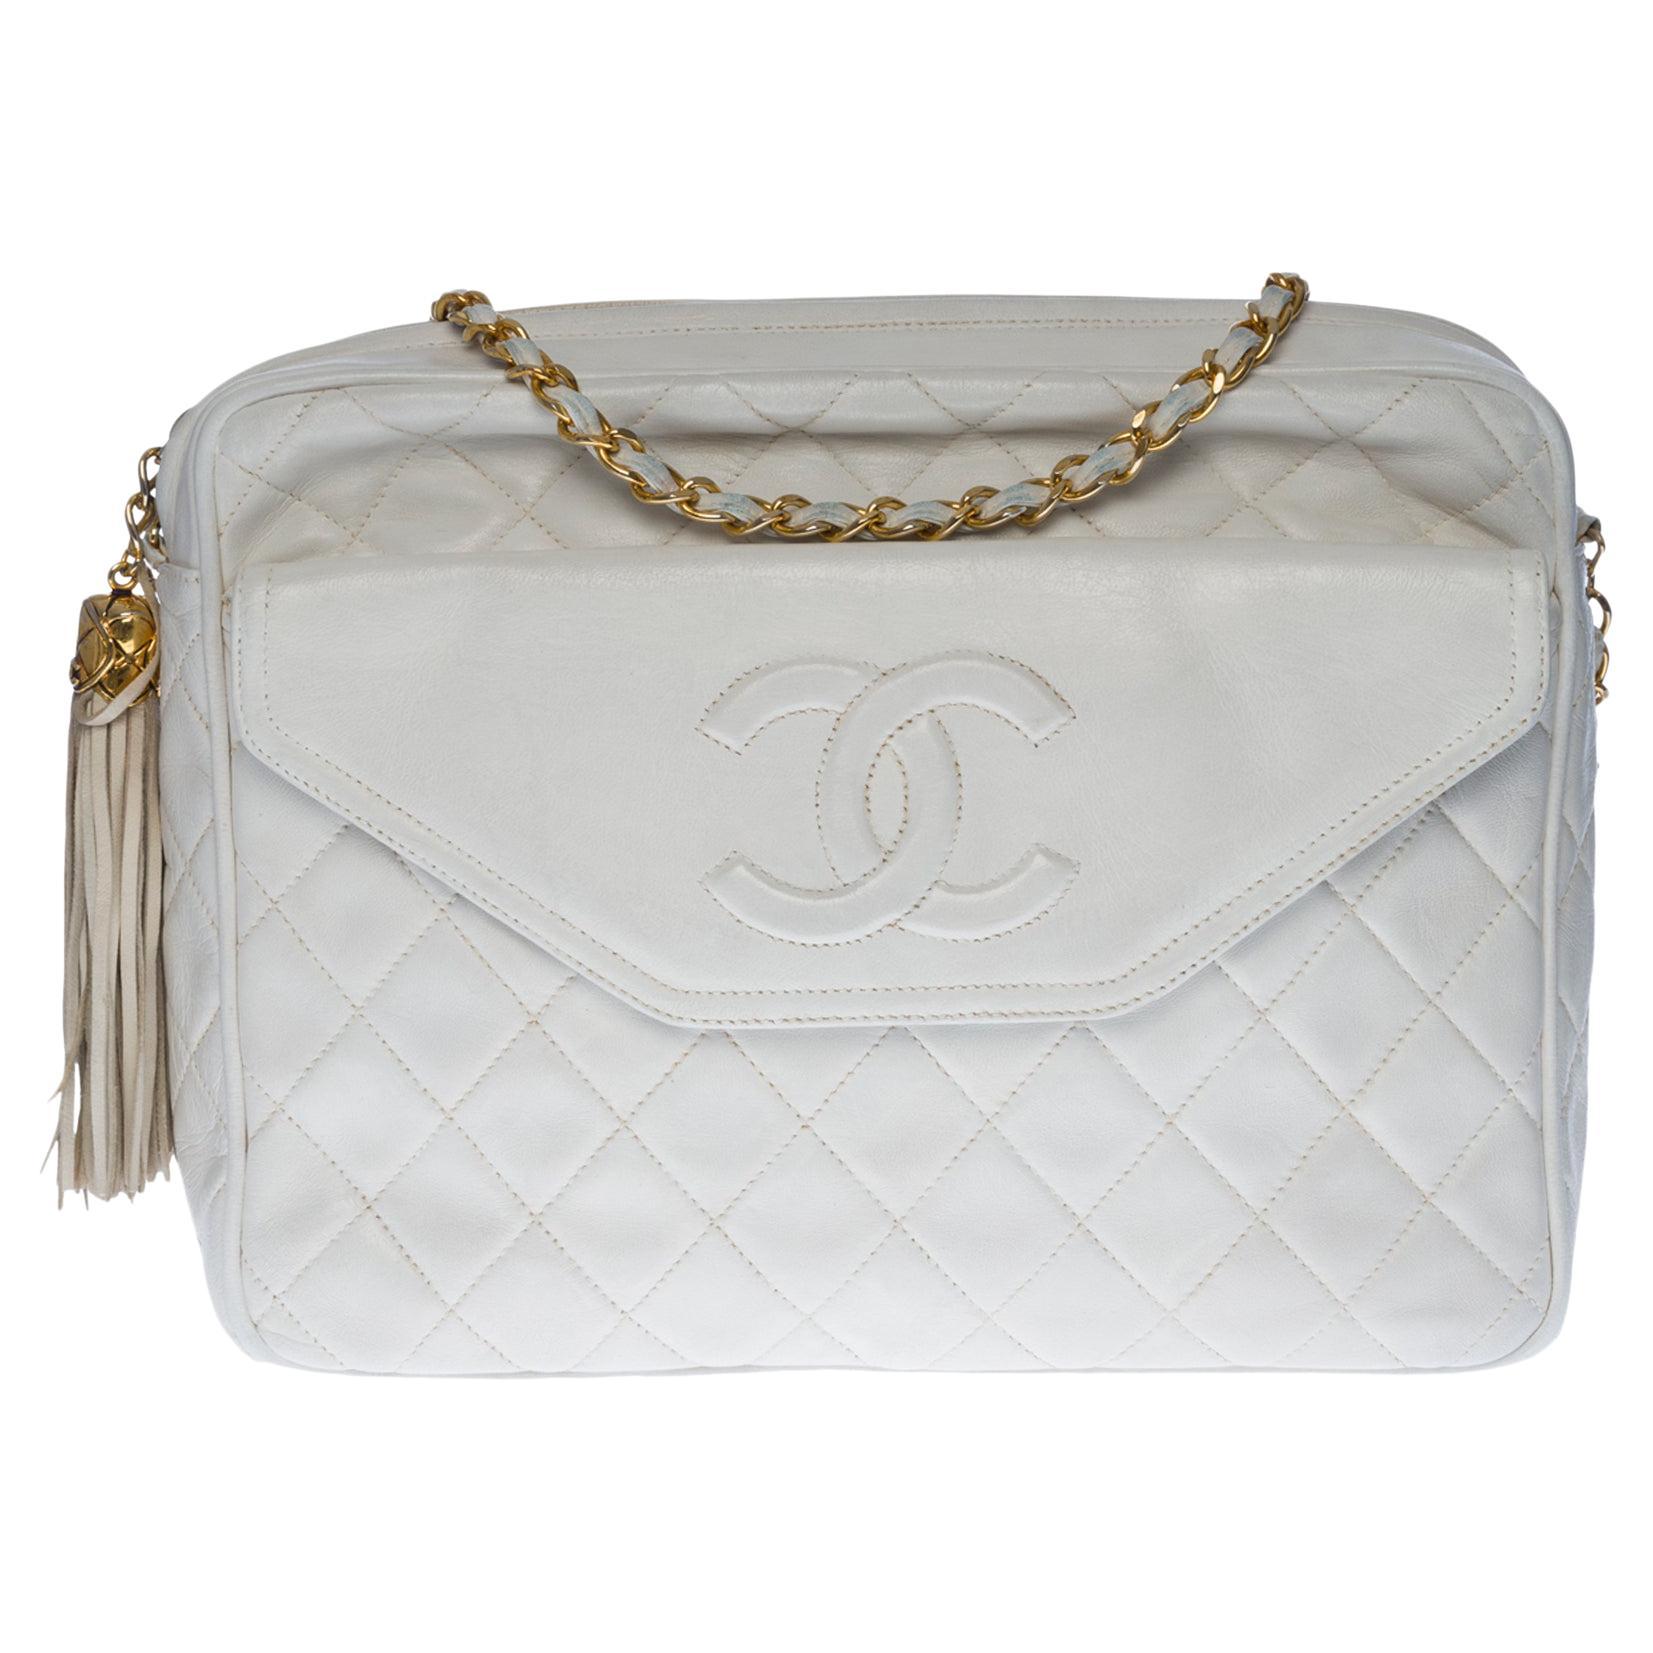 Amazing Chanel Camera shoulder bag in White quilted leather, GHW